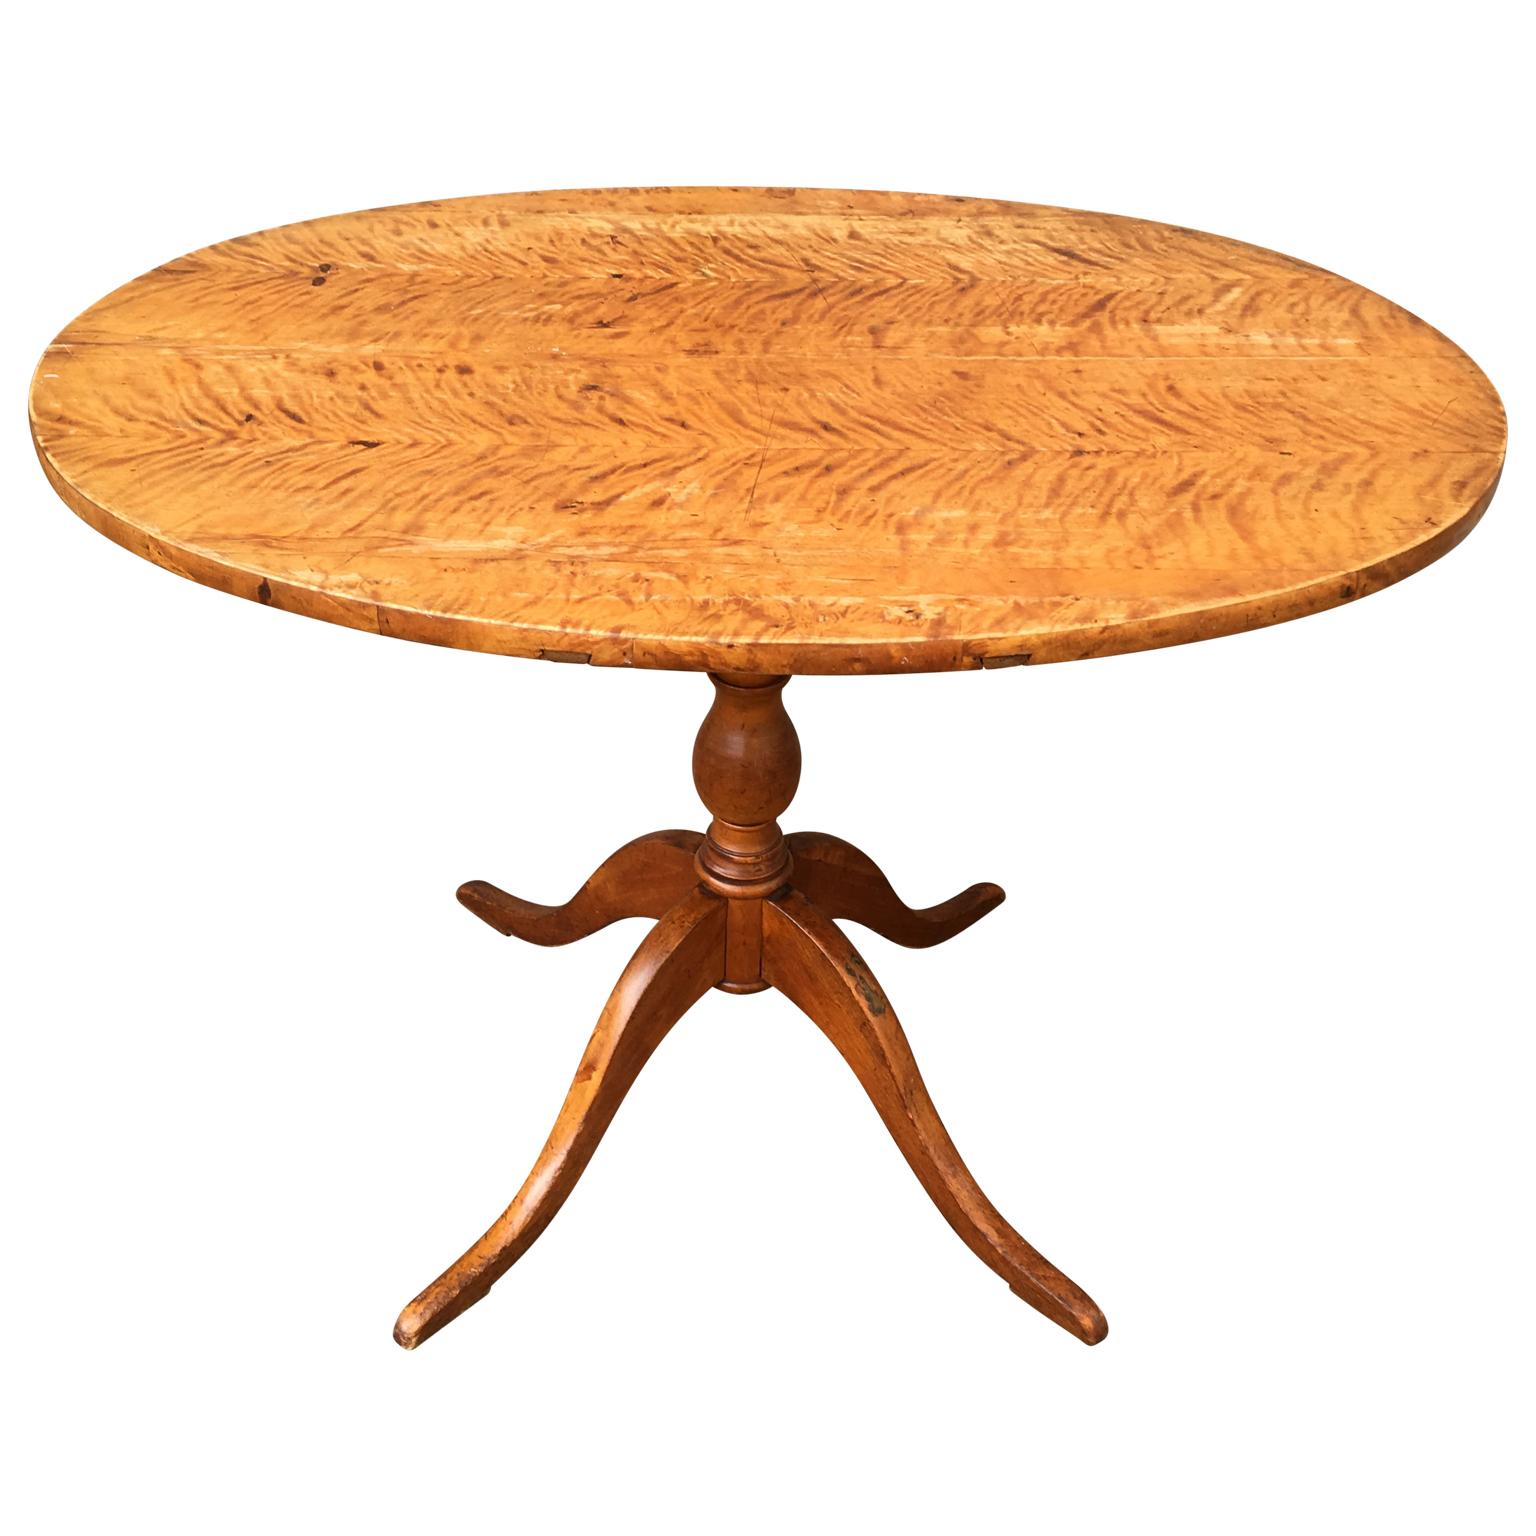 An early 19th Century Swedish Biedermeier tilt-top table from early 19th century. With typical Scandinavian 